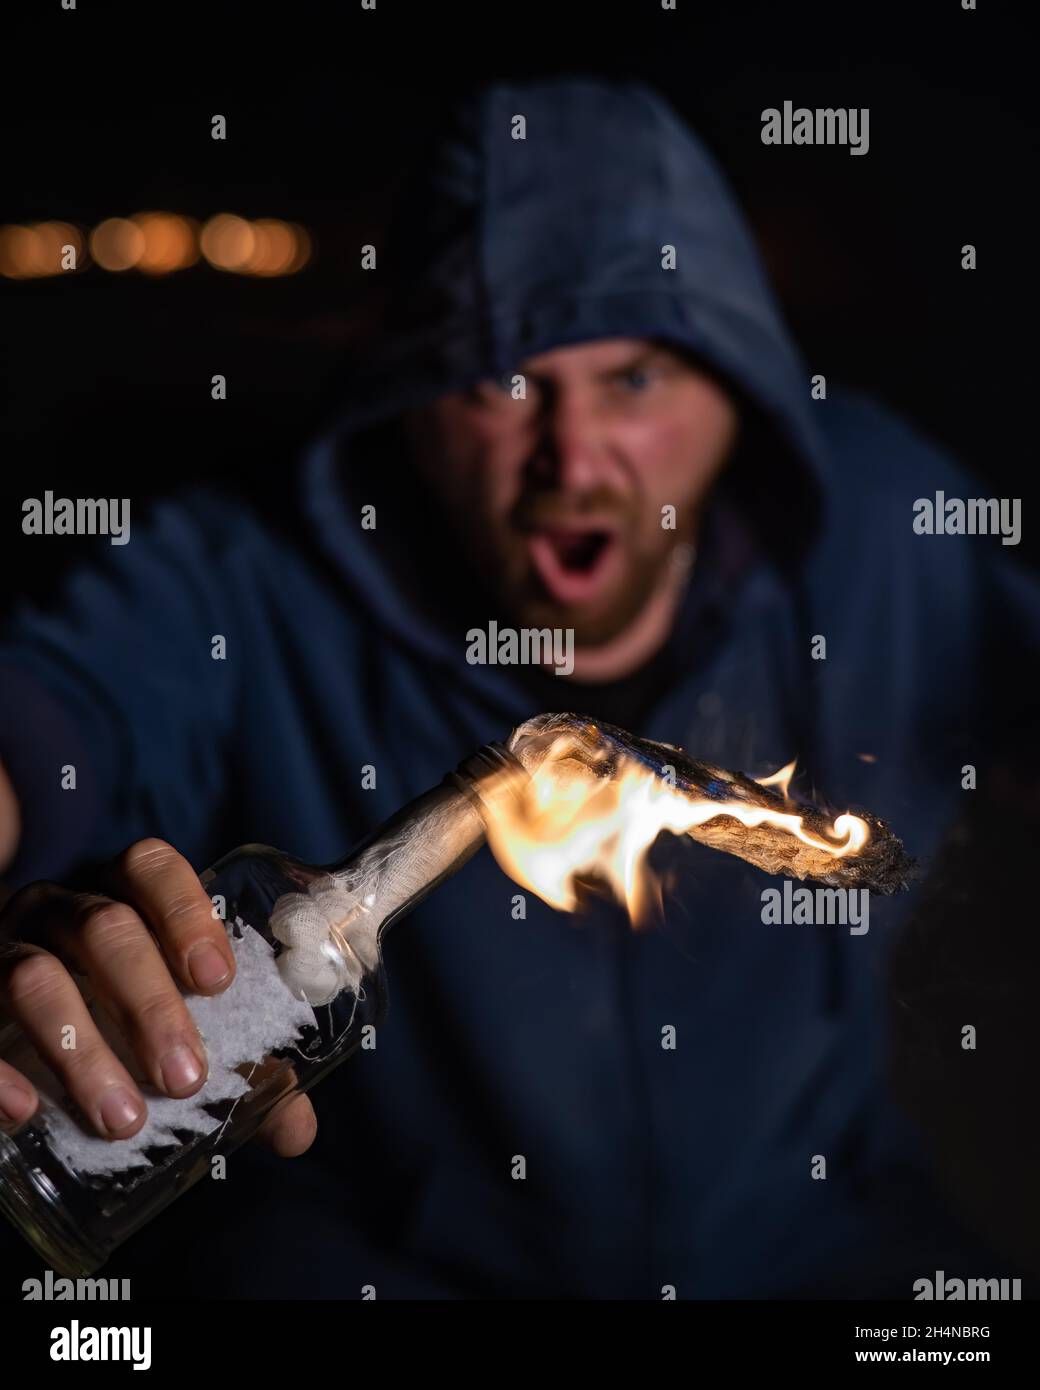 The man in the hood is holding a burning bottle. Molotov cocktail. Stock Photo